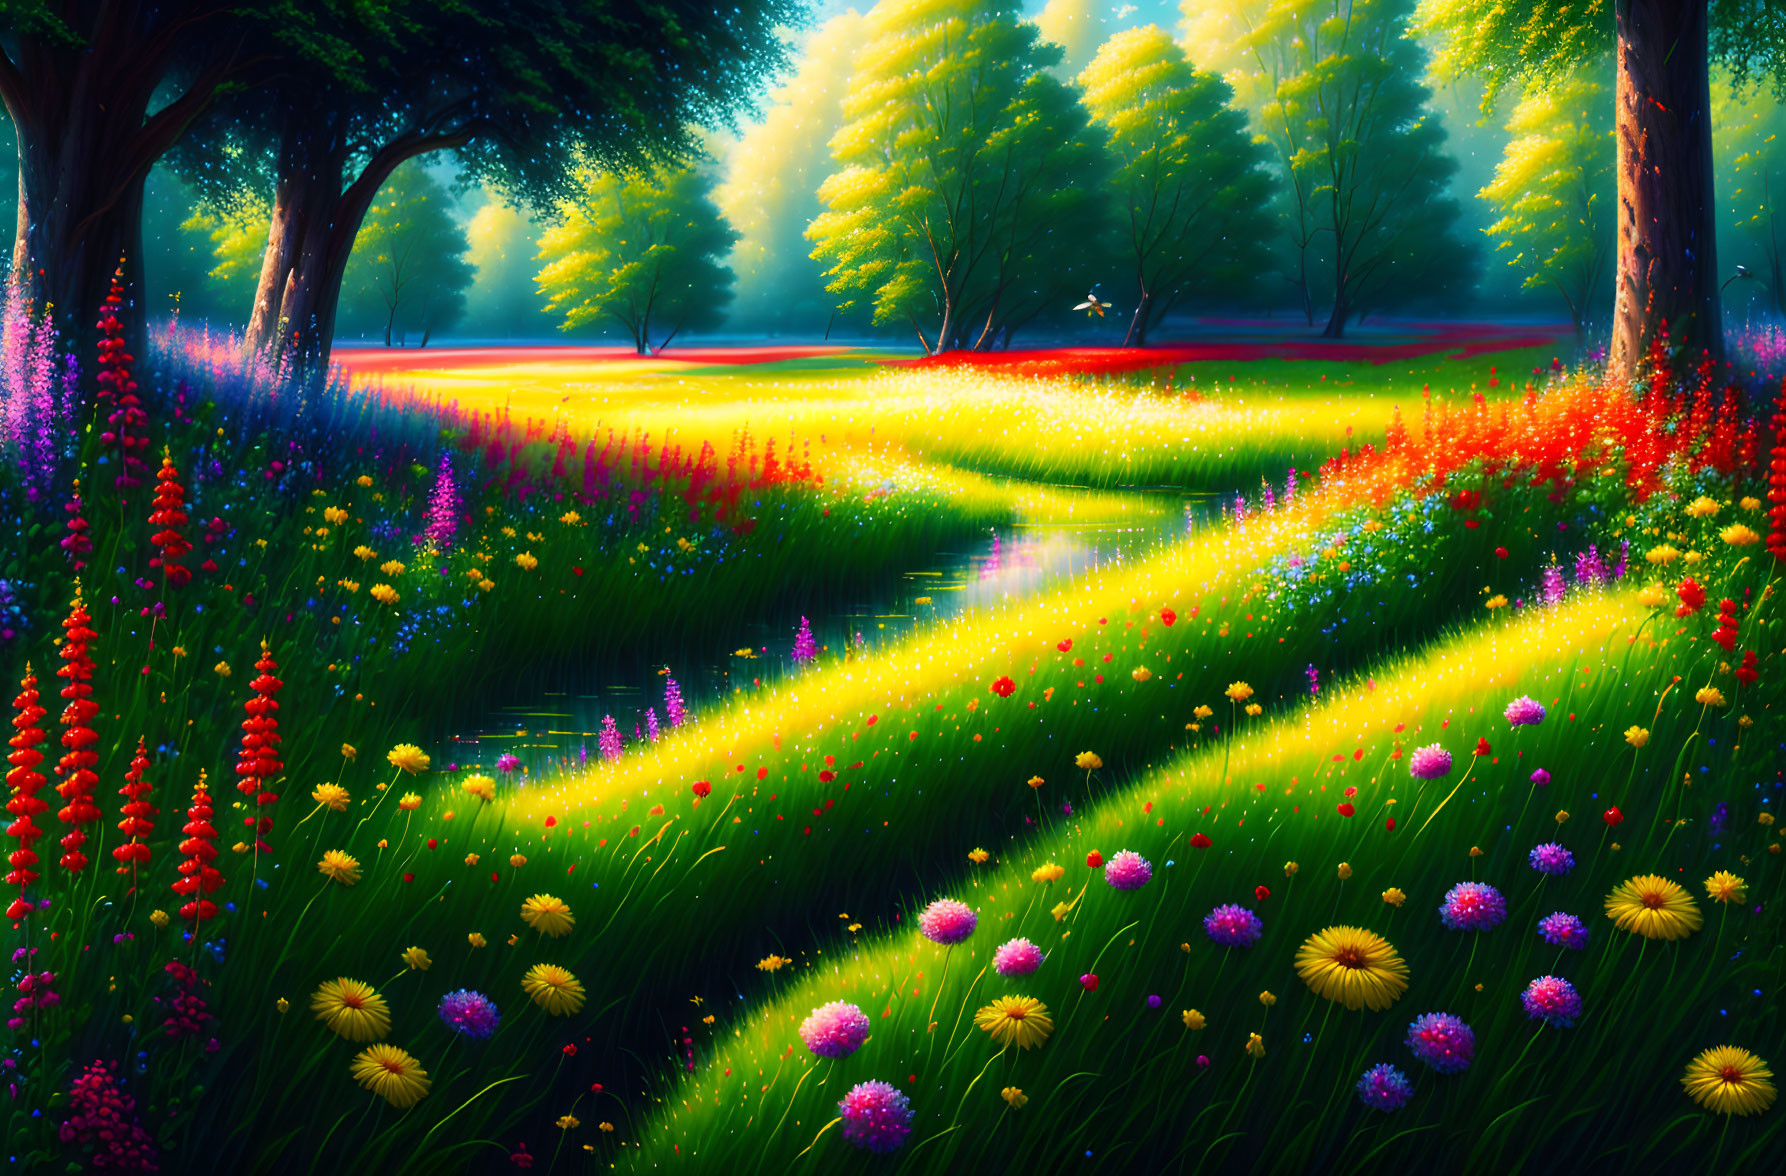 Colorful Meadow with Flowers, Sunlit Trees, and Stream